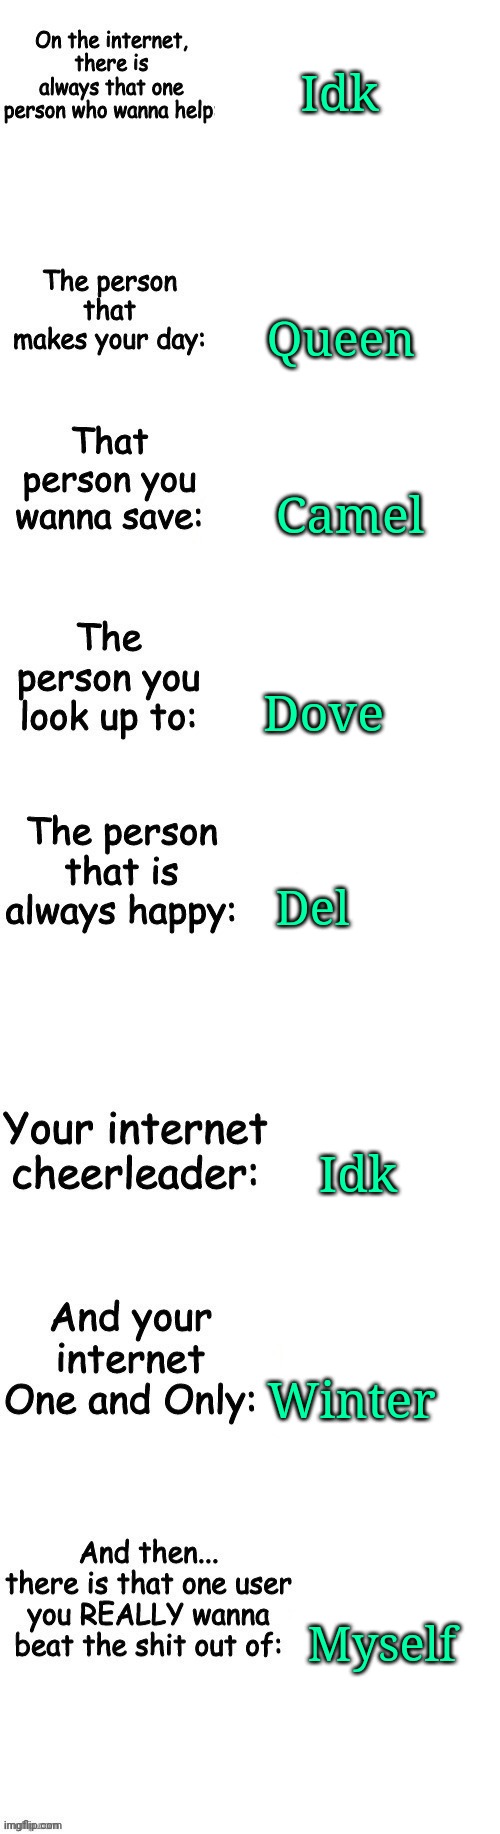 People on the internet | Idk; Queen; Camel; Dove; Del; Idk; Winter; Myself | image tagged in people on the internet | made w/ Imgflip meme maker